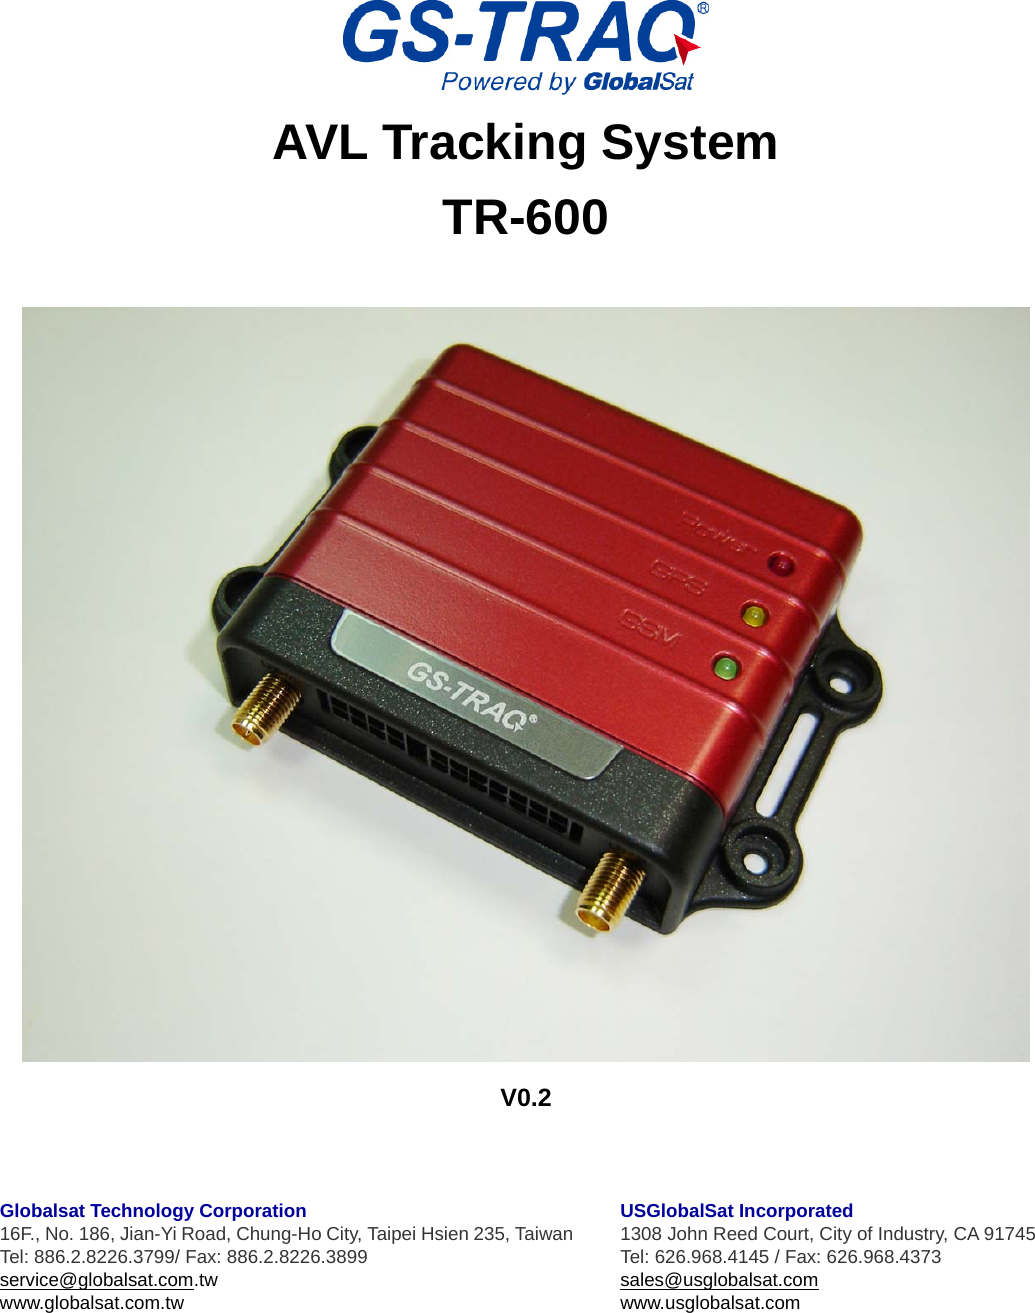   AVL Tracking System TR-600   V0.2    Globalsat Technology Corporation 16F., No. 186, Jian-Yi Road, Chung-Ho City, Taipei Hsien 235, Taiwan Tel: 886.2.8226.3799/ Fax: 886.2.8226.3899 service@globalsat.com.tw www.globalsat.com.tw   USGlobalSat Incorporated 1308 John Reed Court, City of Industry, CA 91745 Tel: 626.968.4145 / Fax: 626.968.4373 sales@usglobalsat.com www.usglobalsat.com  